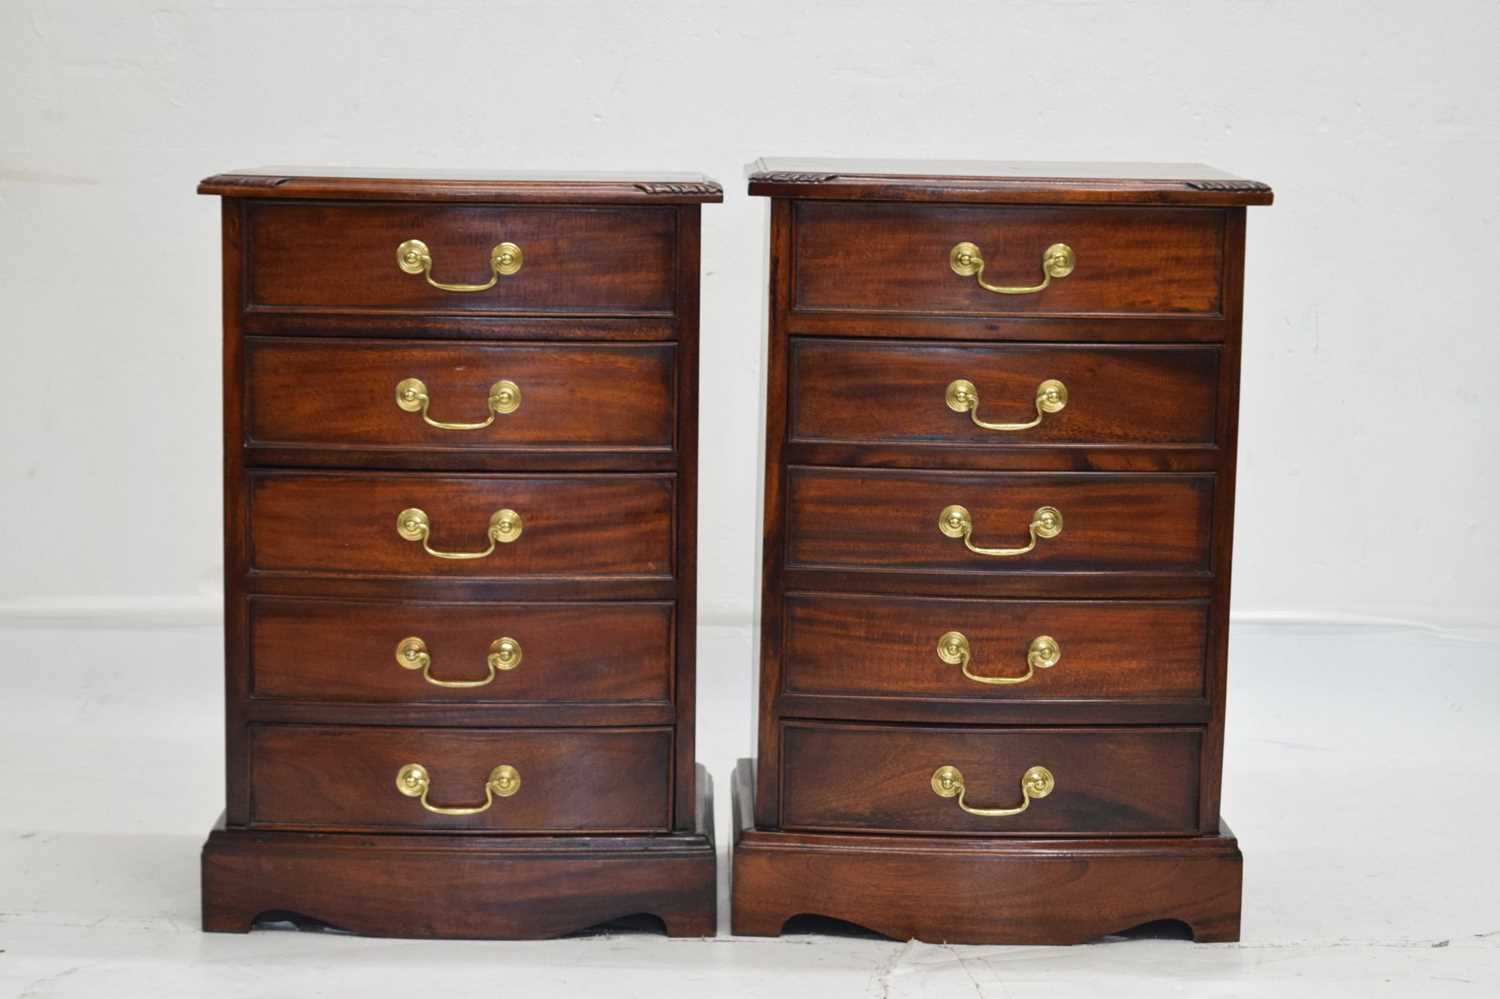 Pair of reproduction mahogany five-drawer bedside chests of drawers - Image 3 of 8